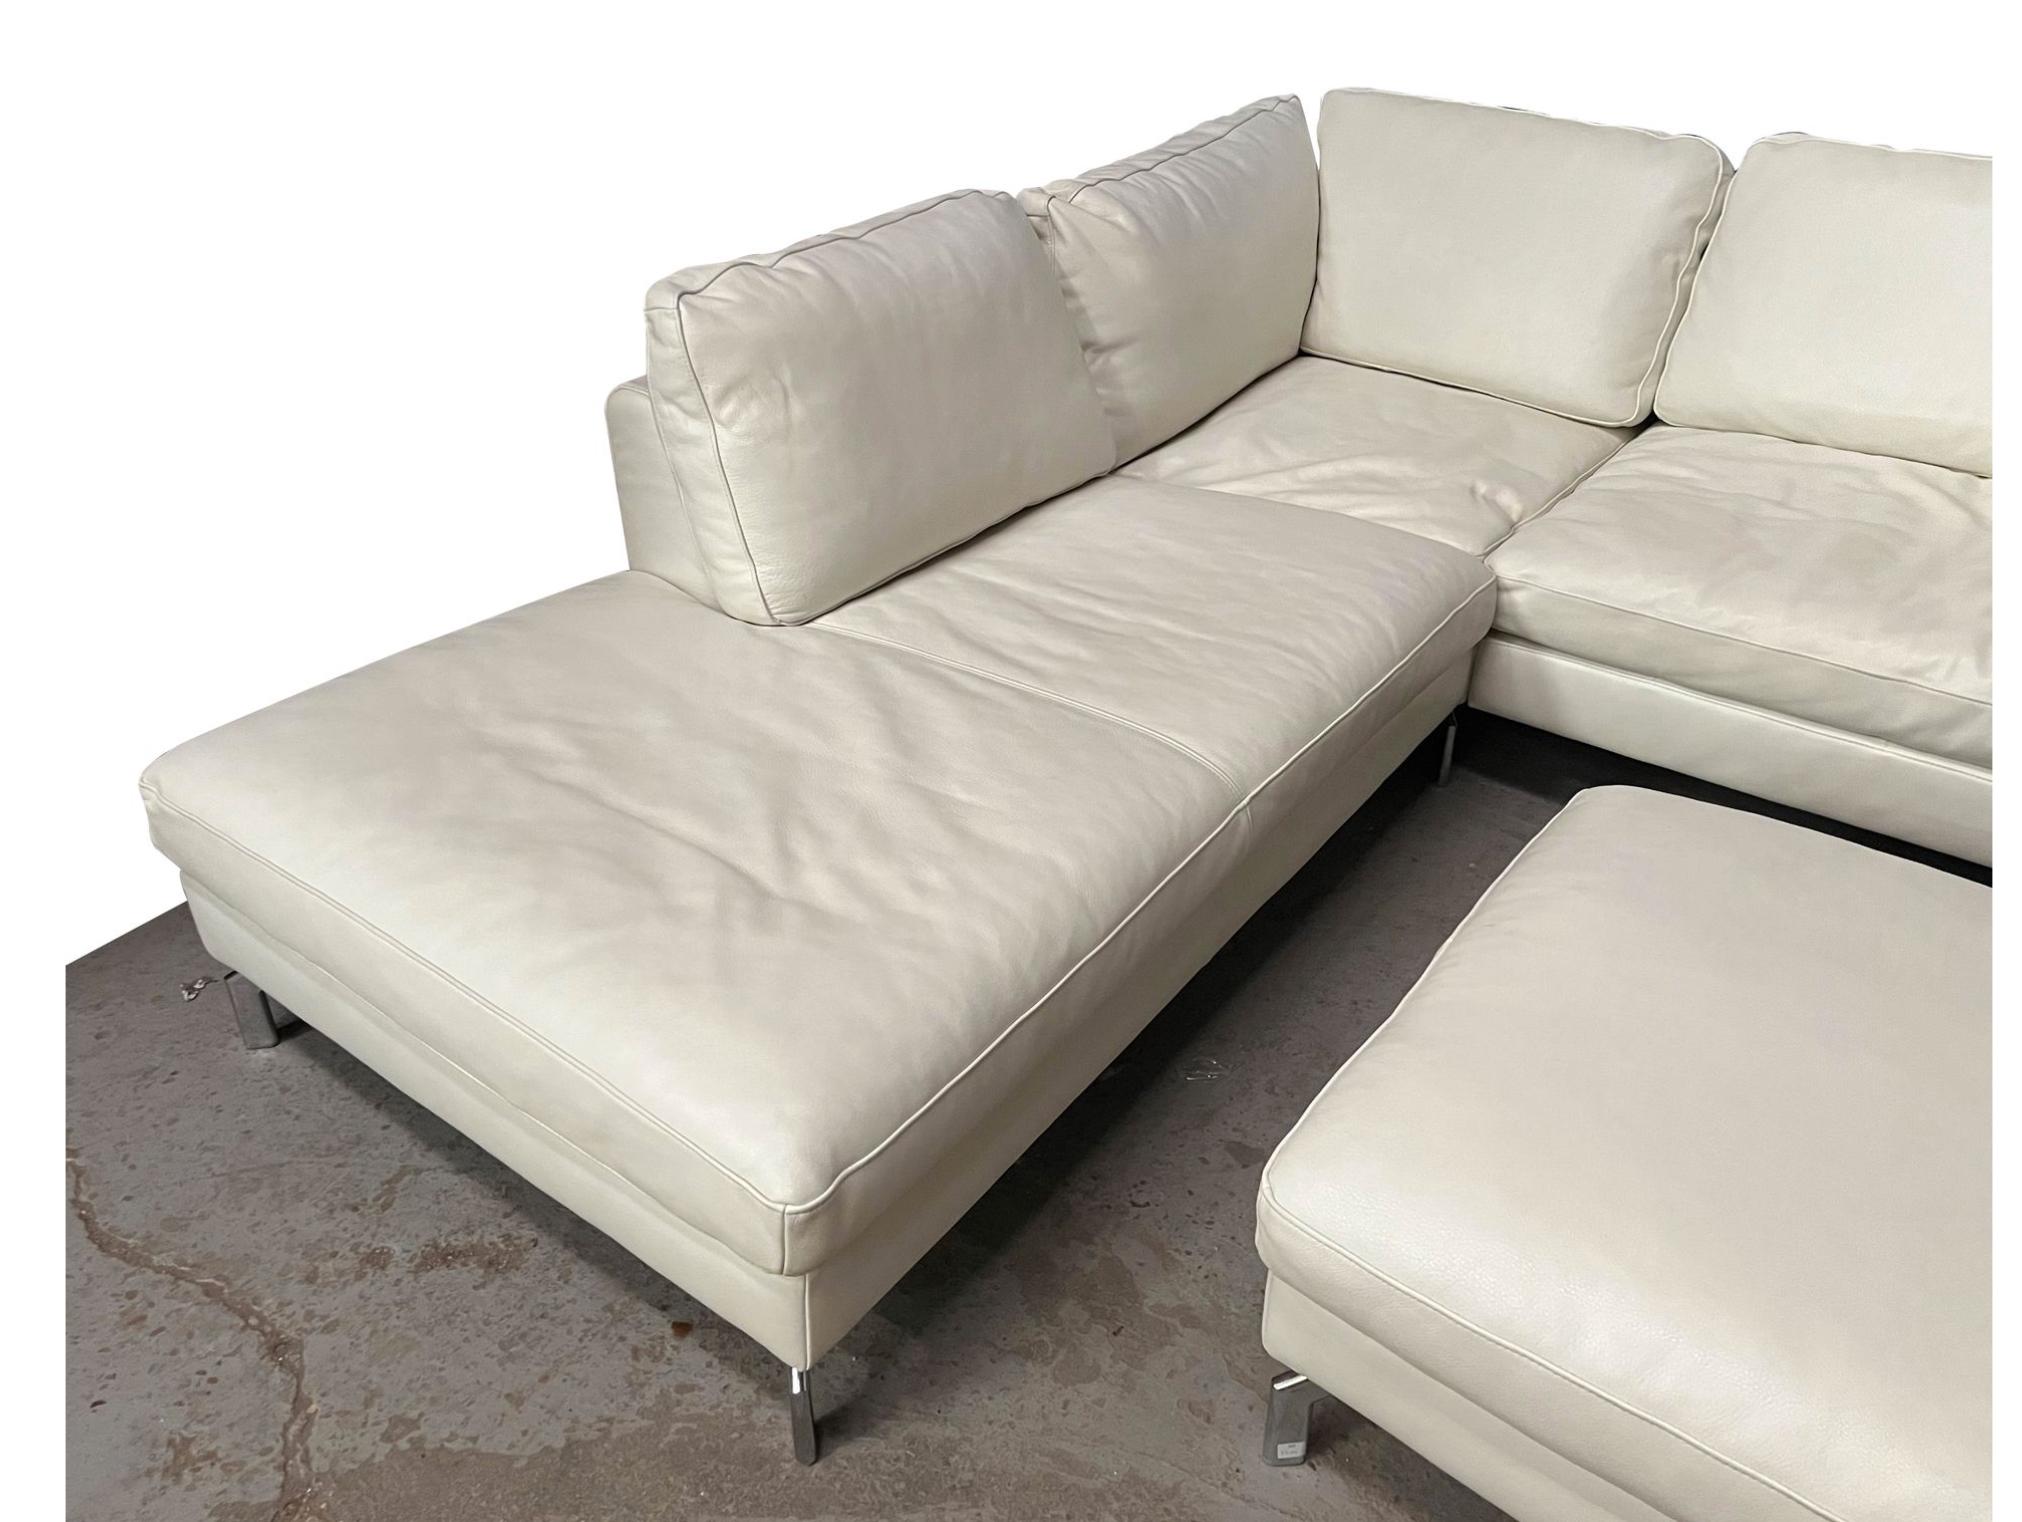 20th Century French corner sofa made in white genuine leather resting on elegant chrome legs.
Perfect condition.
France, circa 1990.